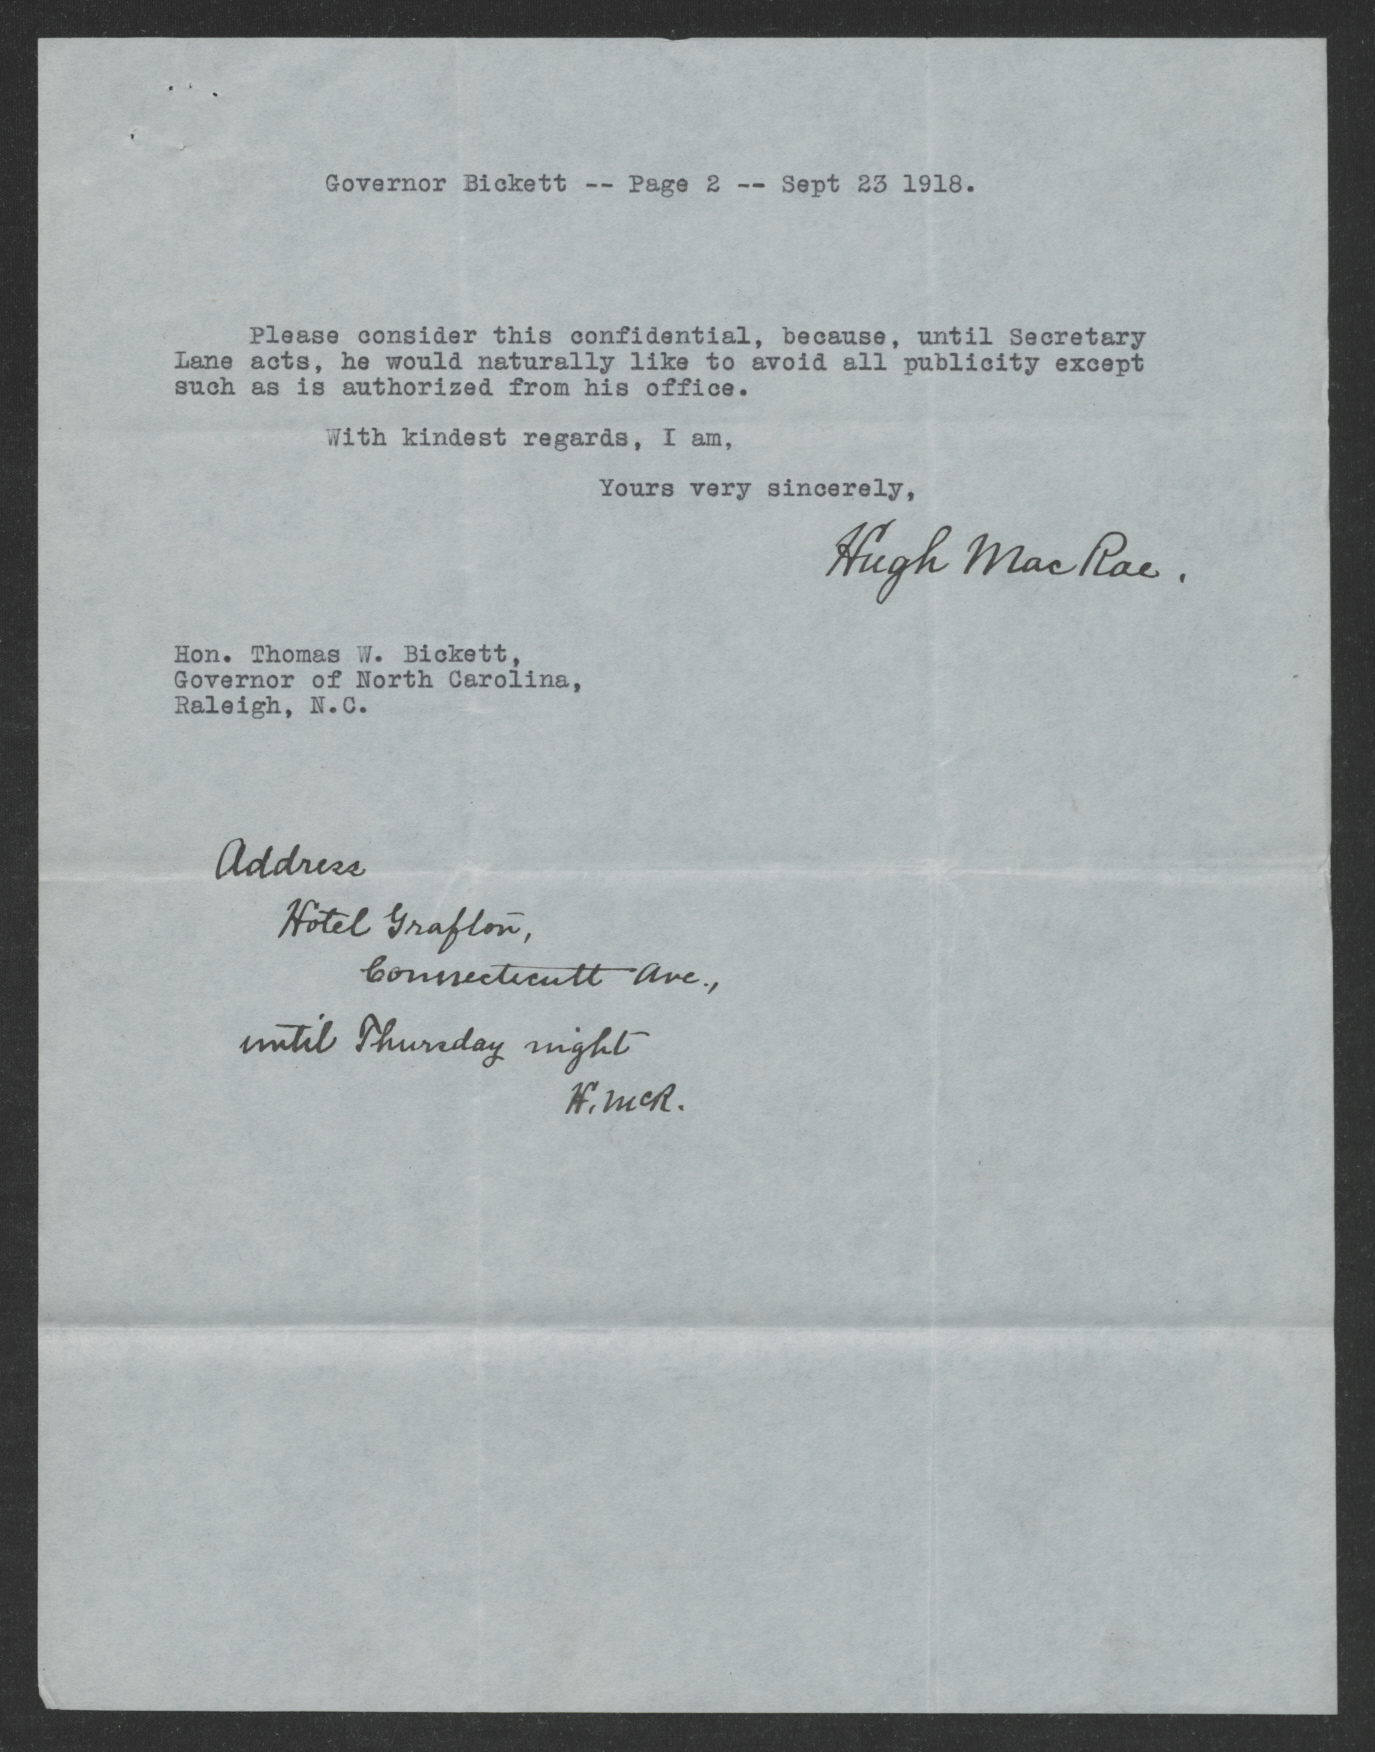 Letter from Hugh MacRae to Thomas W. Bickett, September 23, 1918, page 2